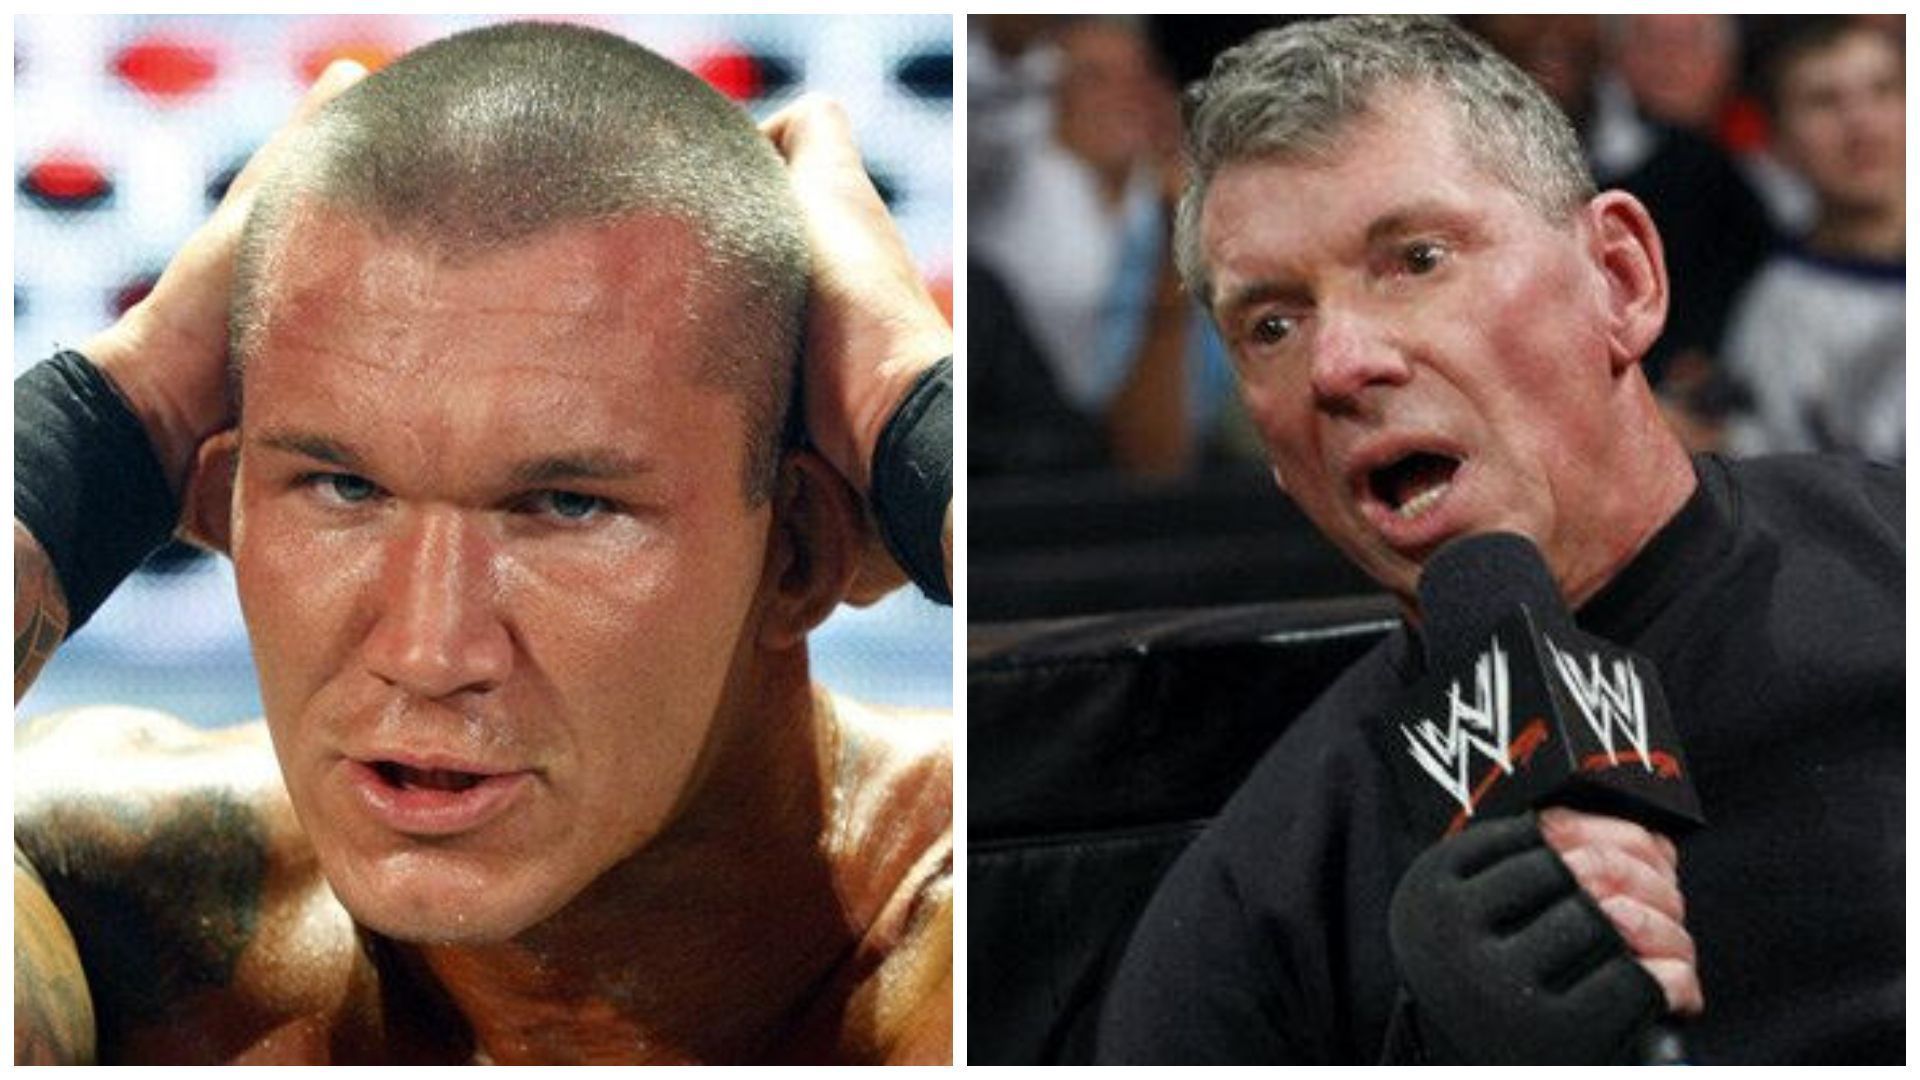 Randy Orton (left) and Vince McMahon (right).